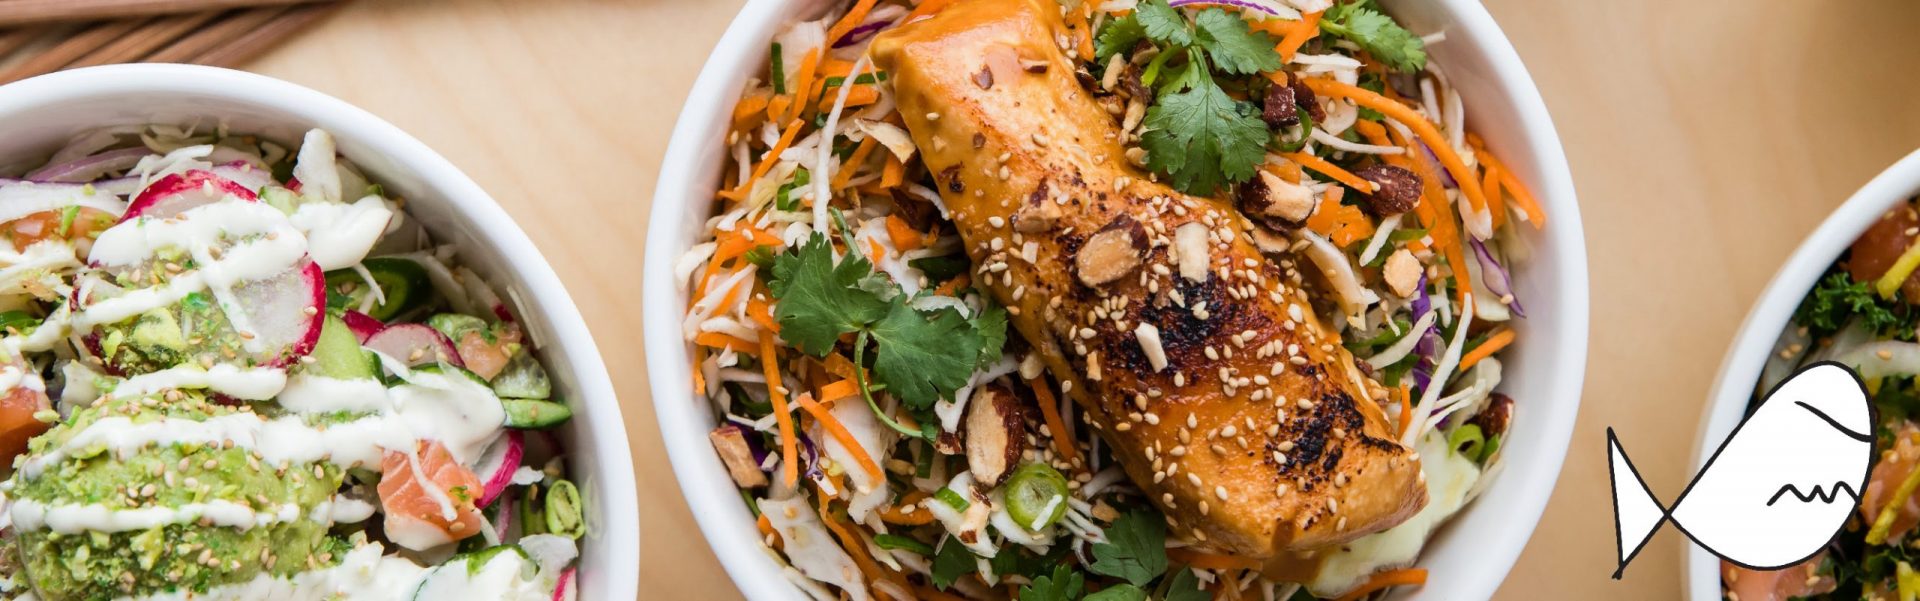 DEAL: Fishbowl - 20% off Orders with $10 Minimum Spend via Deliveroo (until 7 July 2022) 3